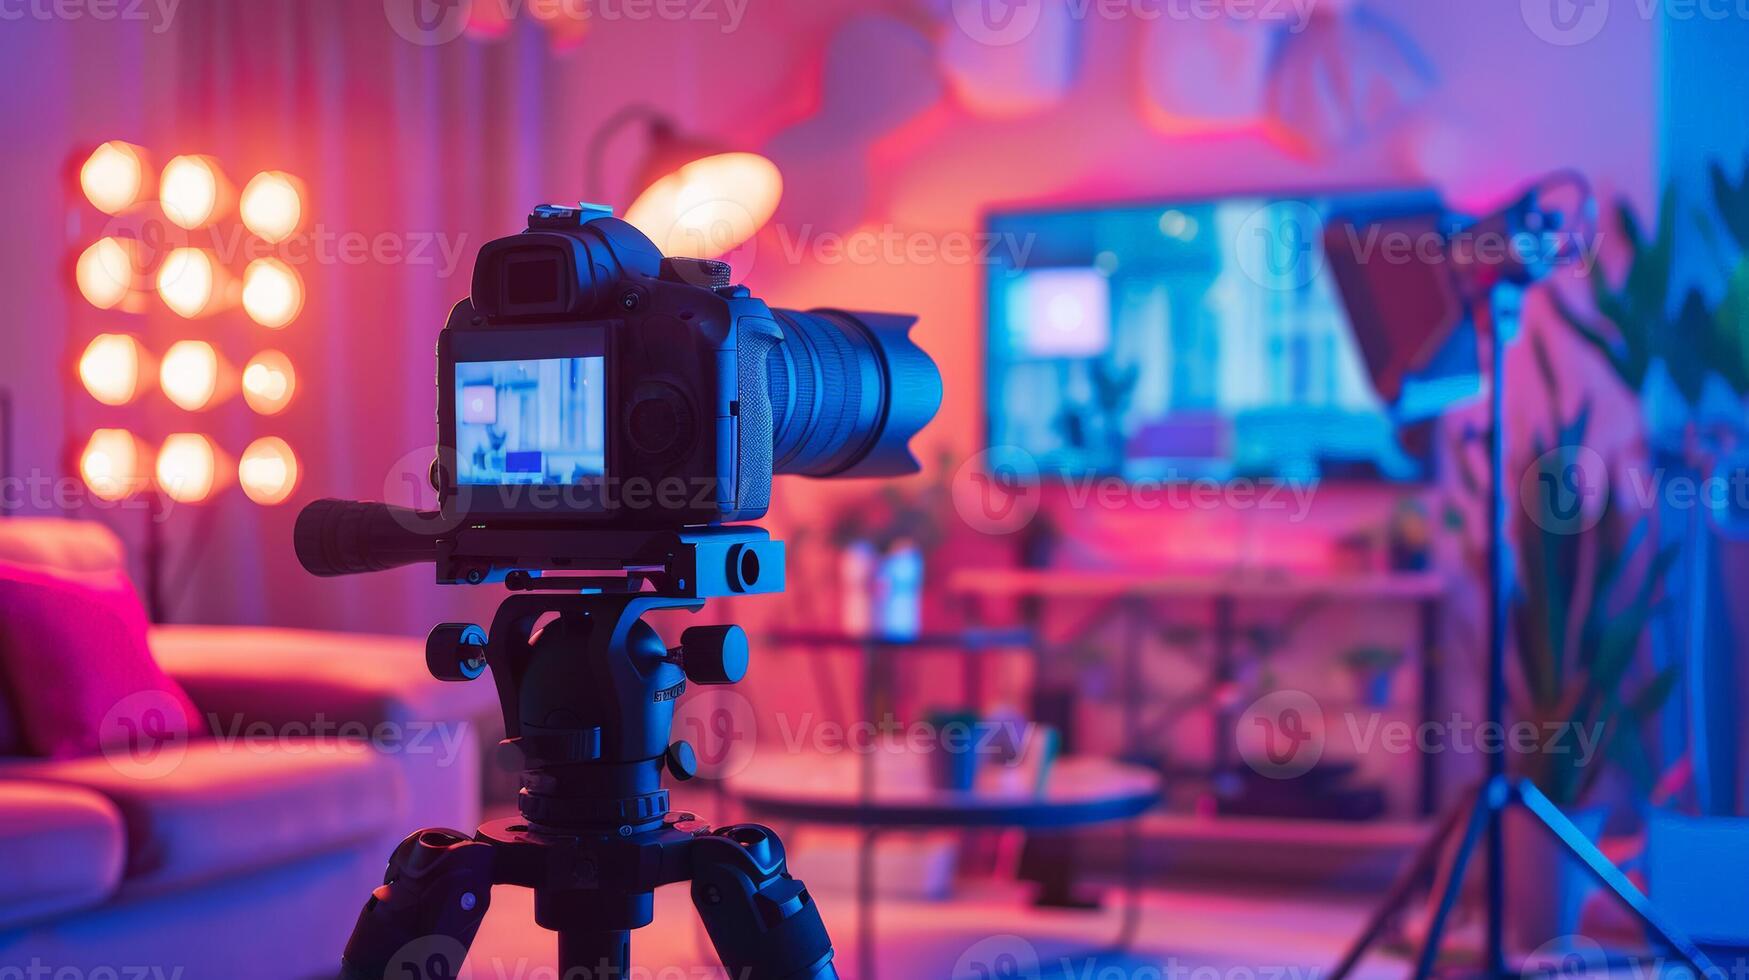 Professional DSLR camera on tripod in neon lit studio setup, concept for World Photography Day or content creation workshops, with no visible people photo